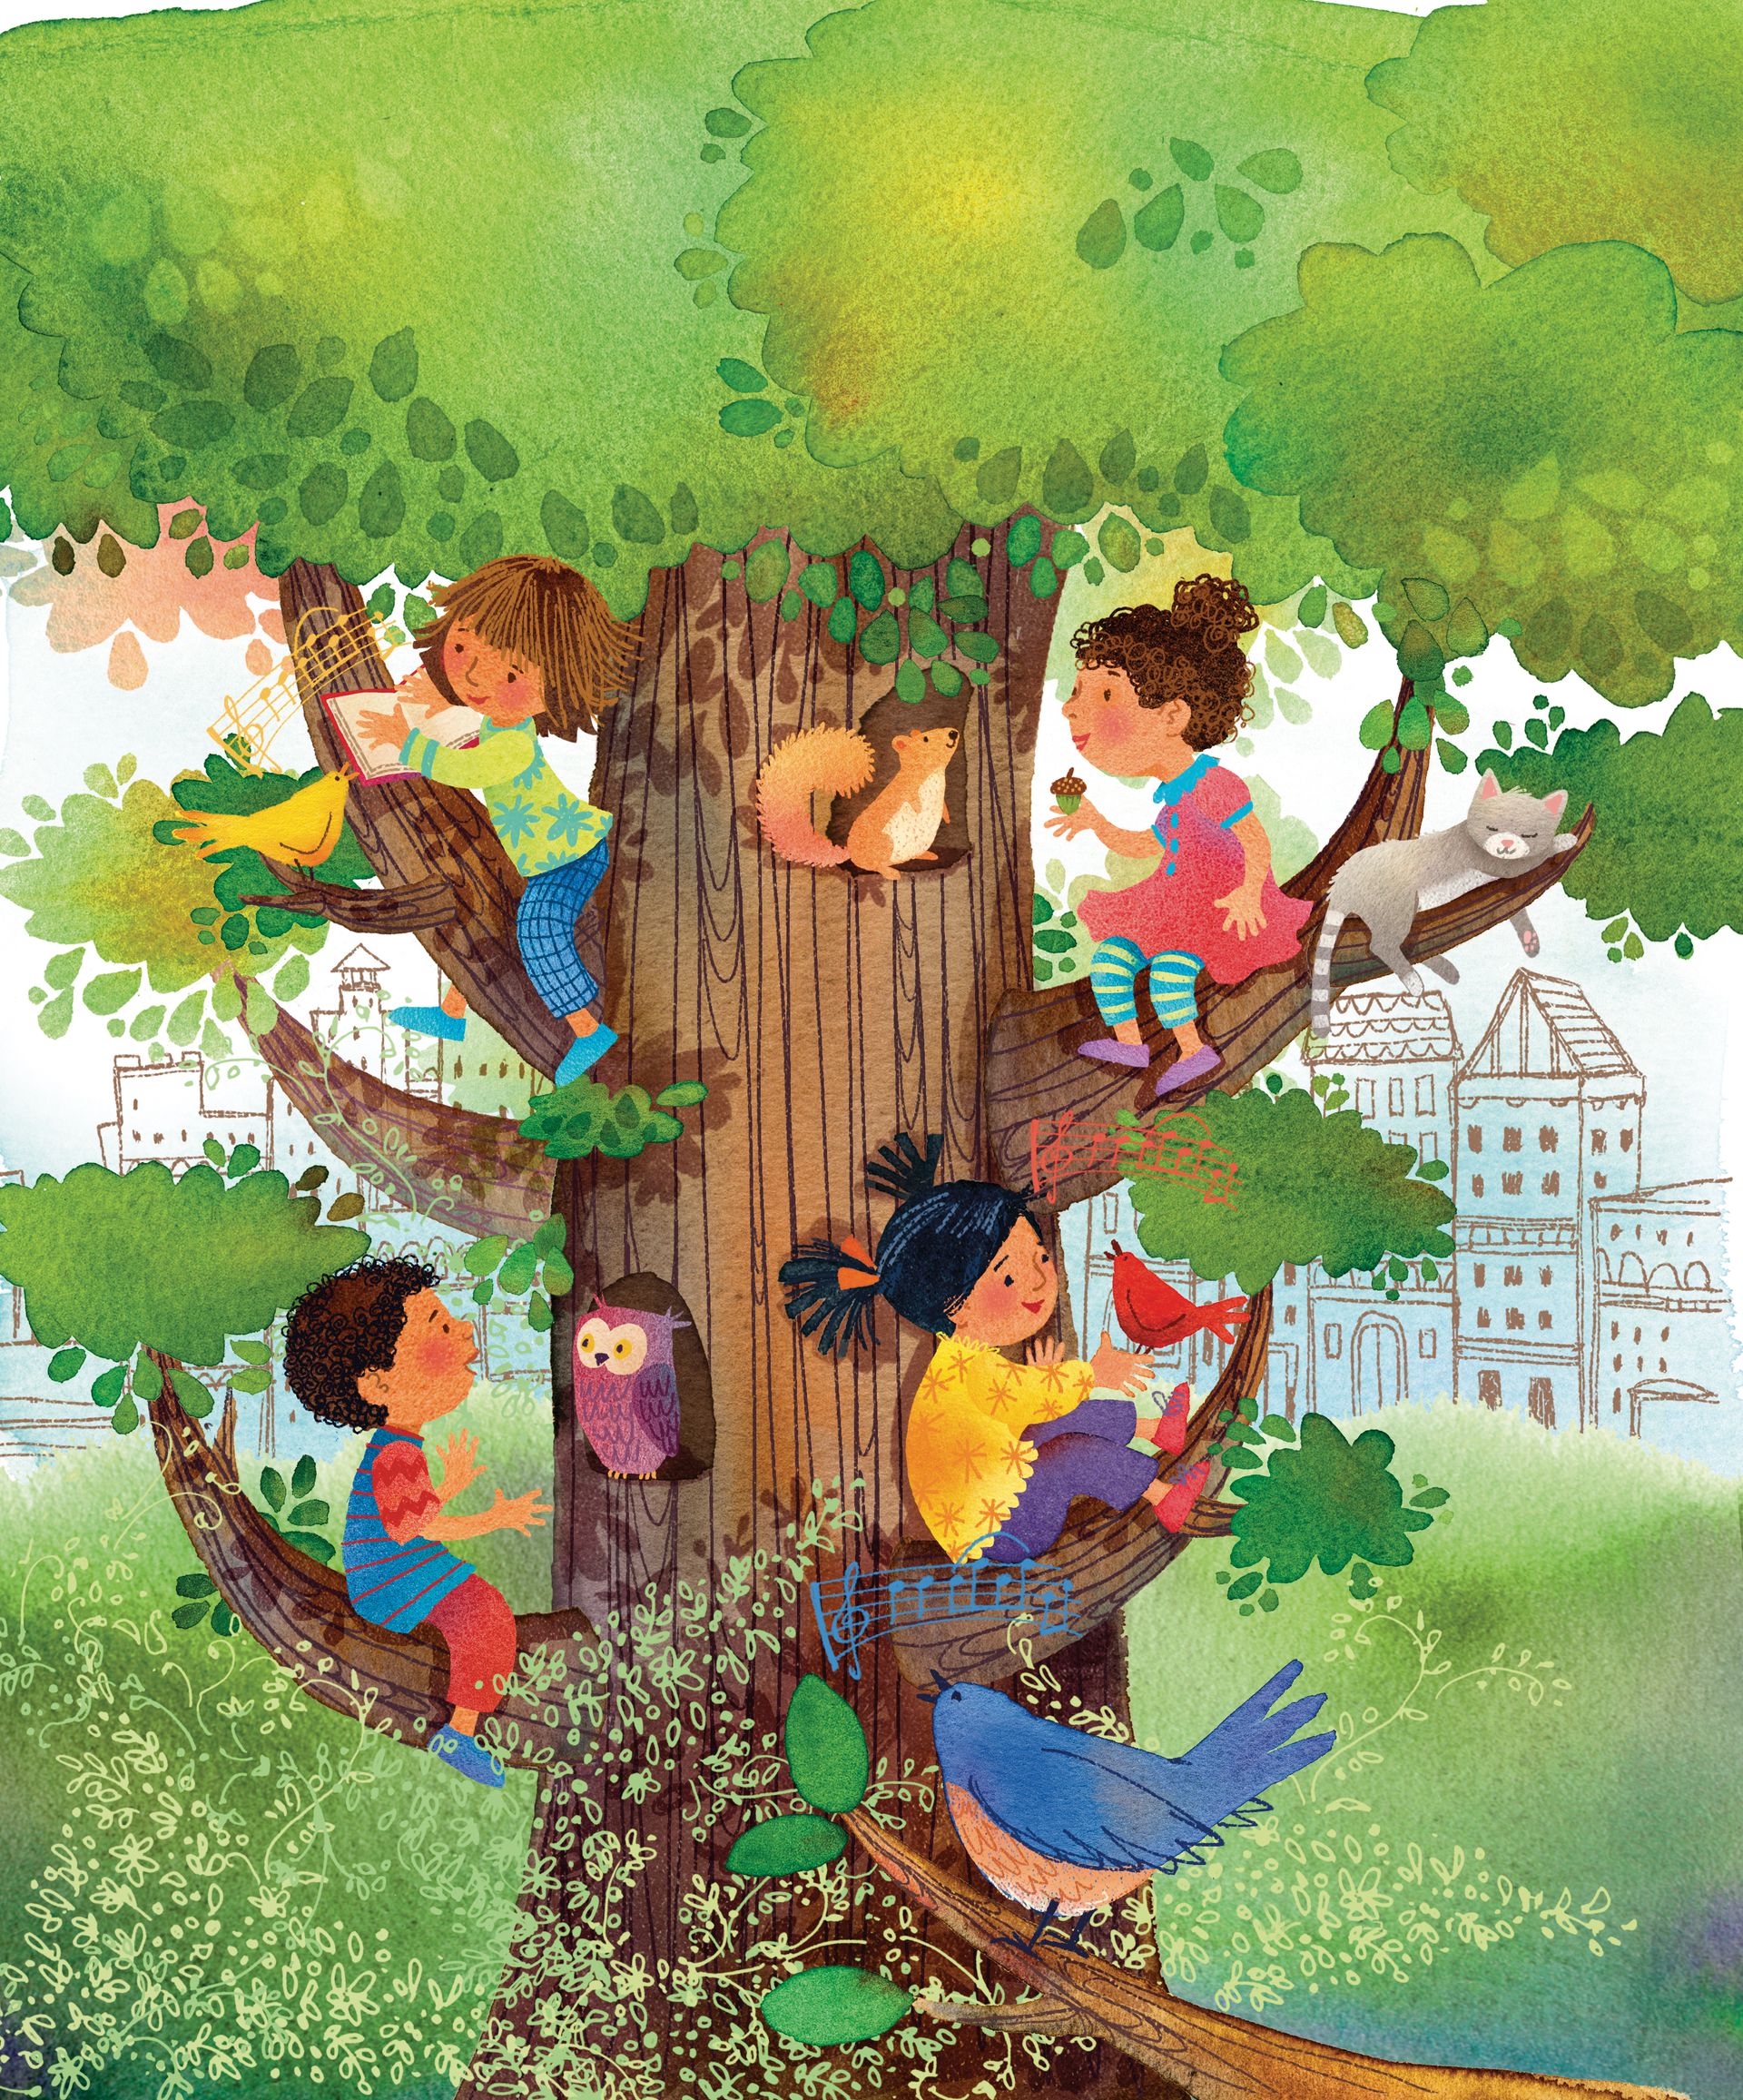 A group of children climb a tree filled with animals, with a view of a city in the background.